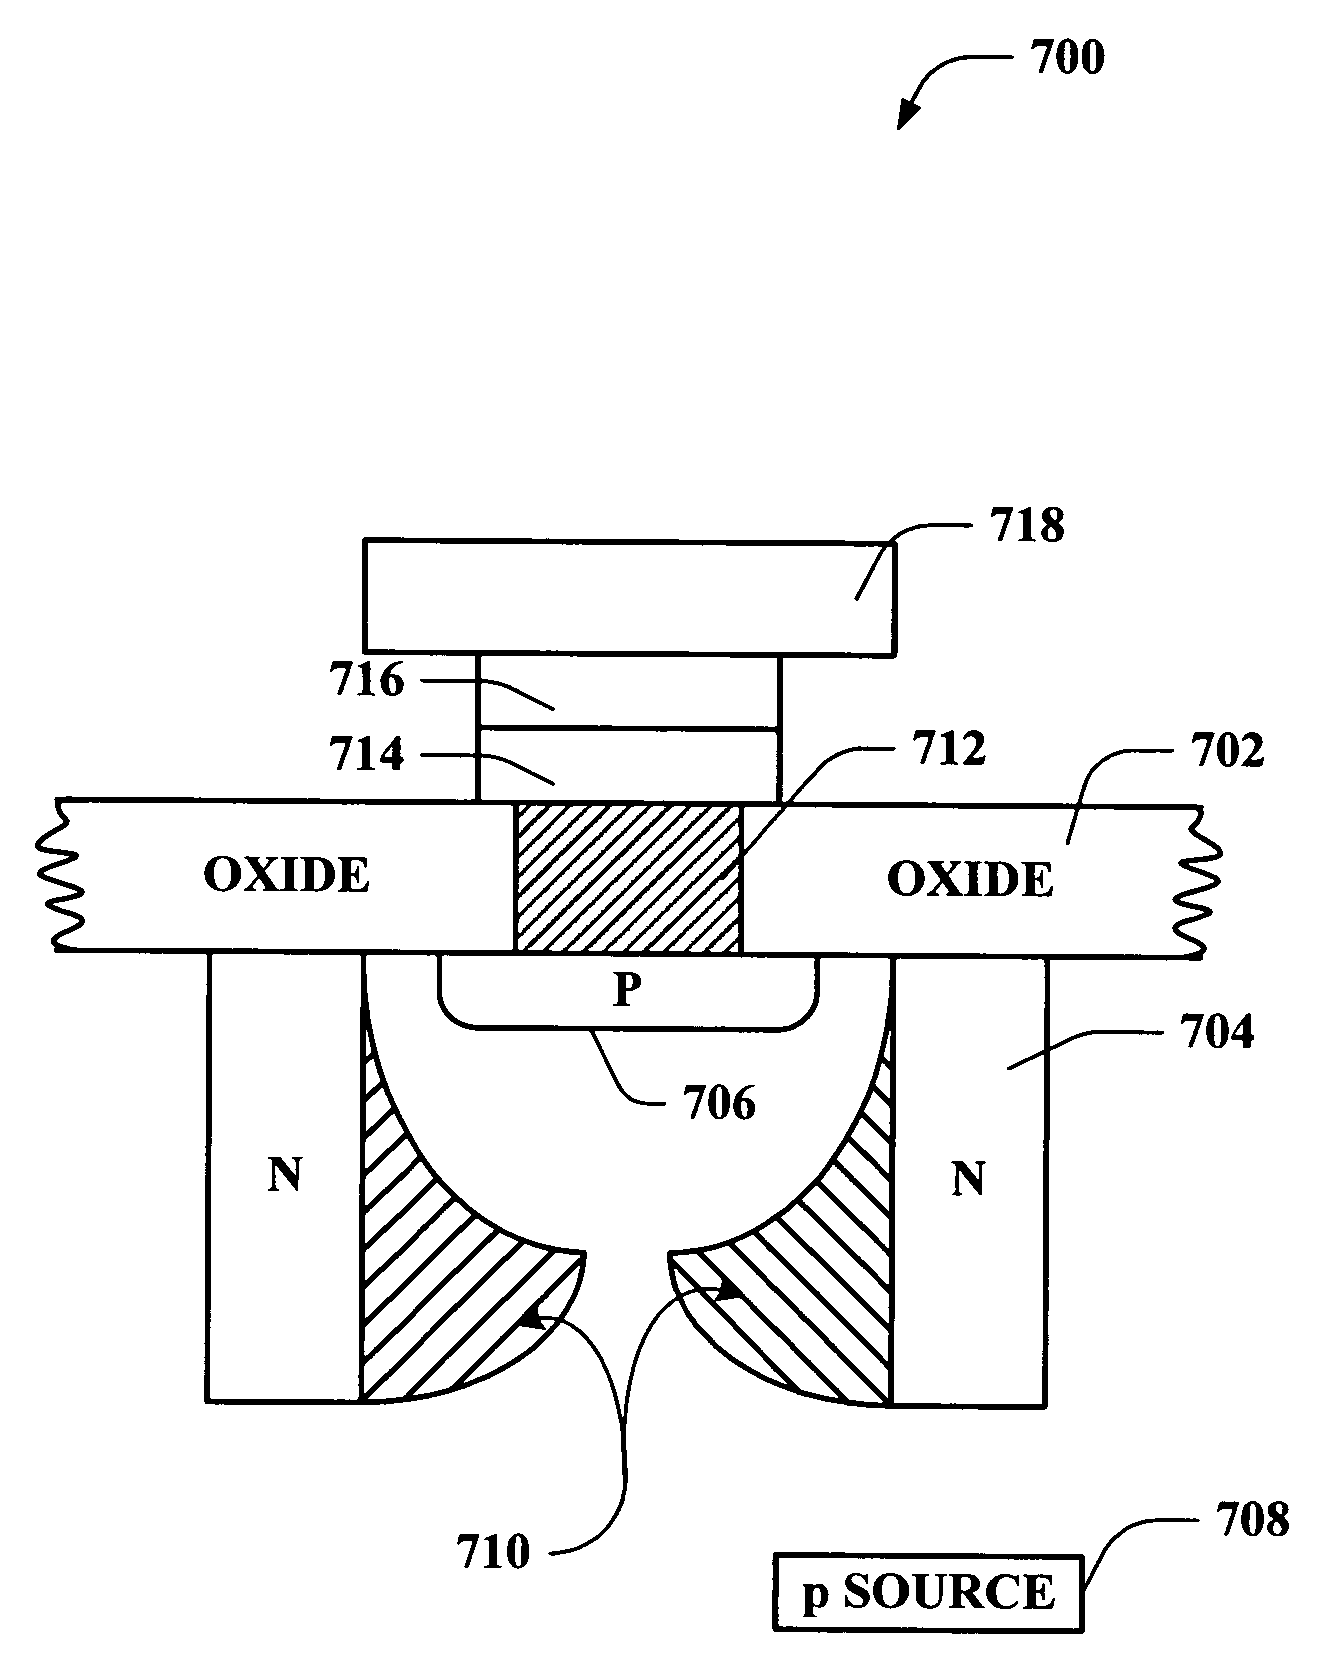 Vertical JFET as used for selective component in a memory array